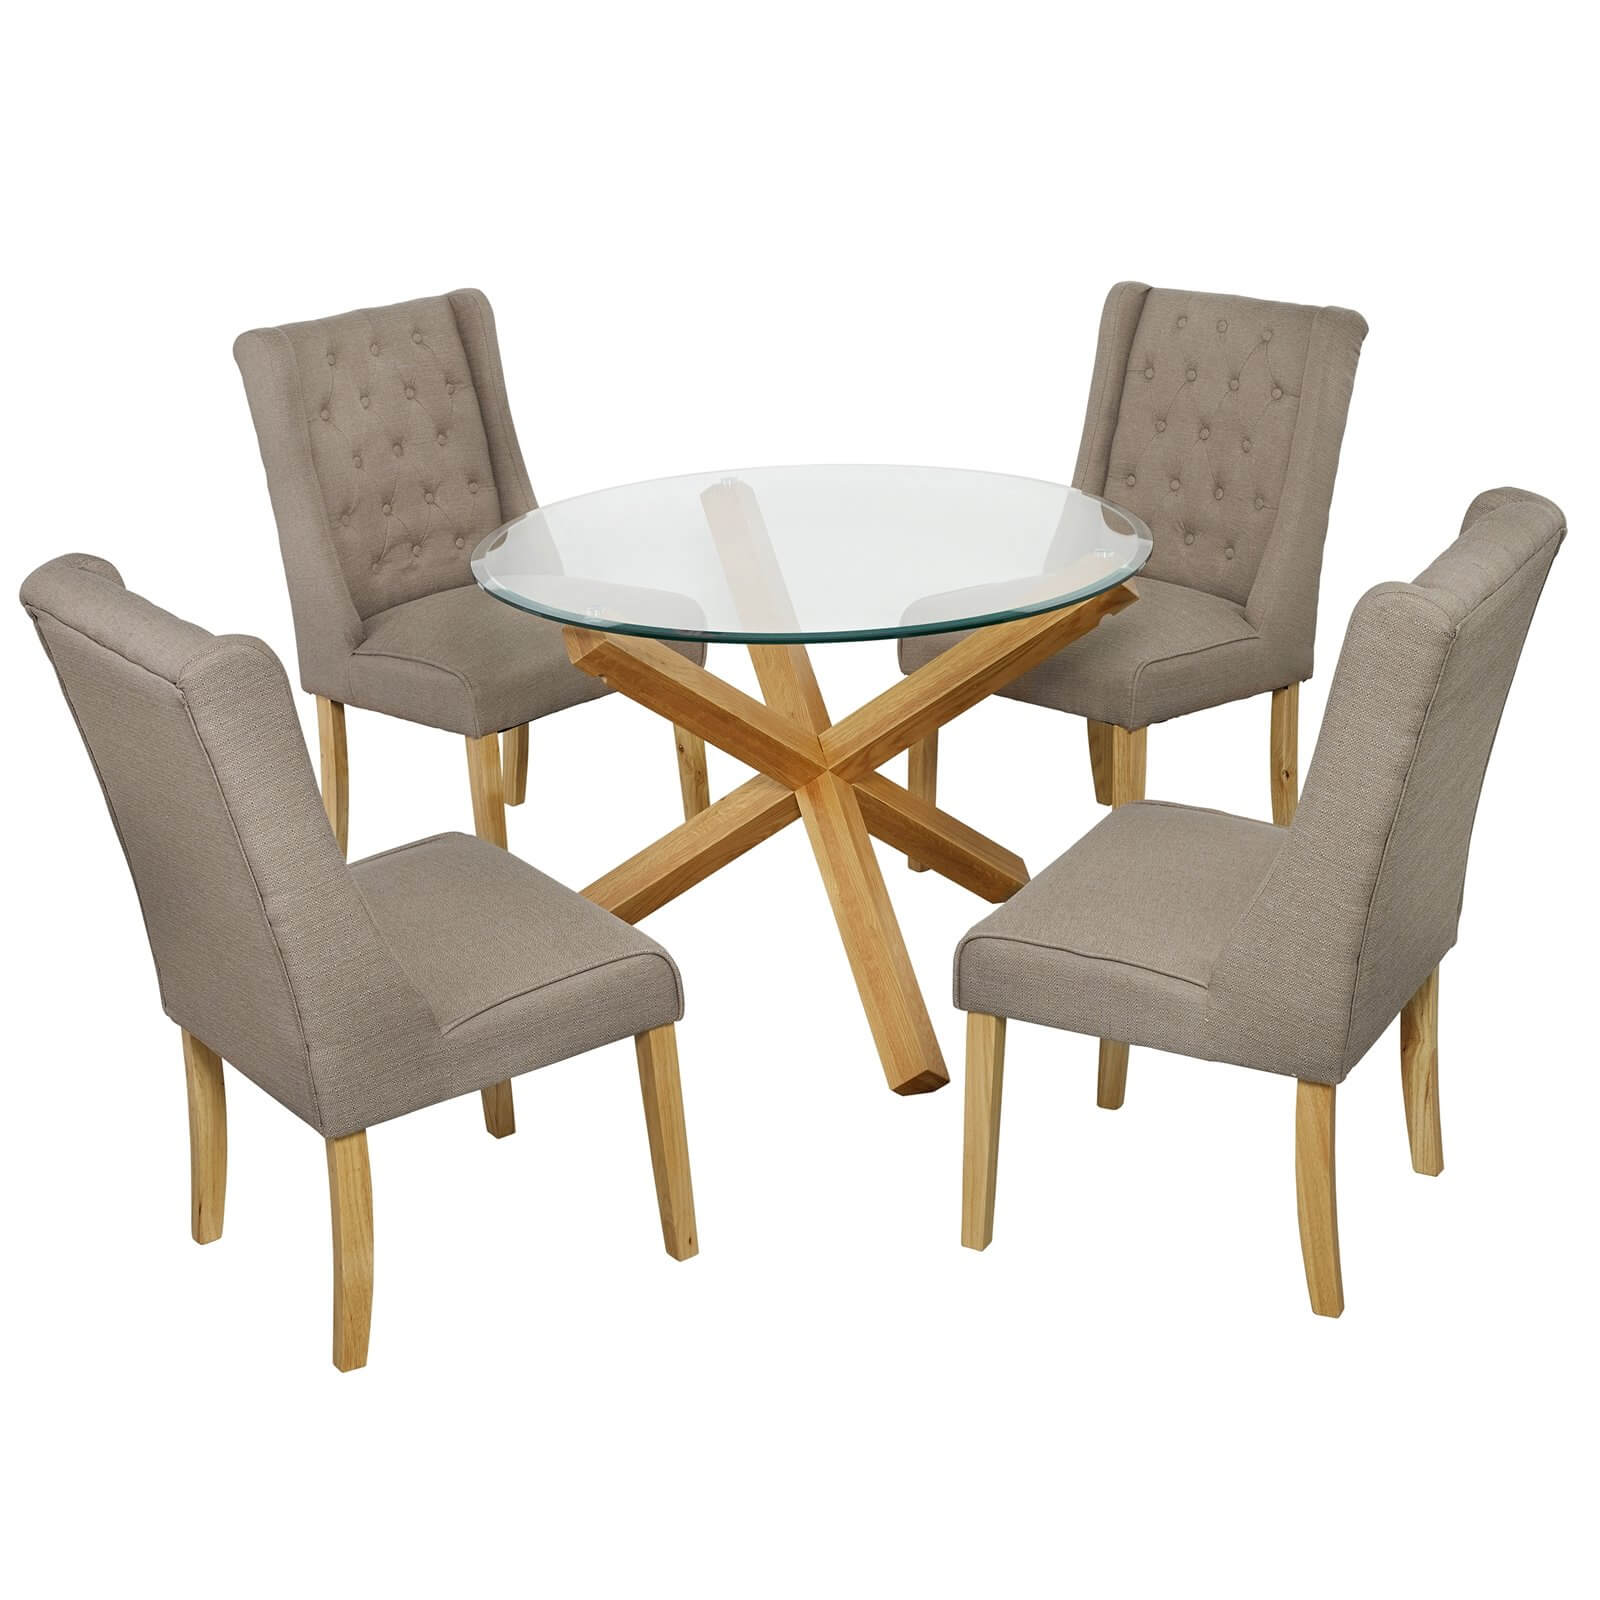 Oporto 4 Seater Dining Set - Verona Dining Chairs - Beige